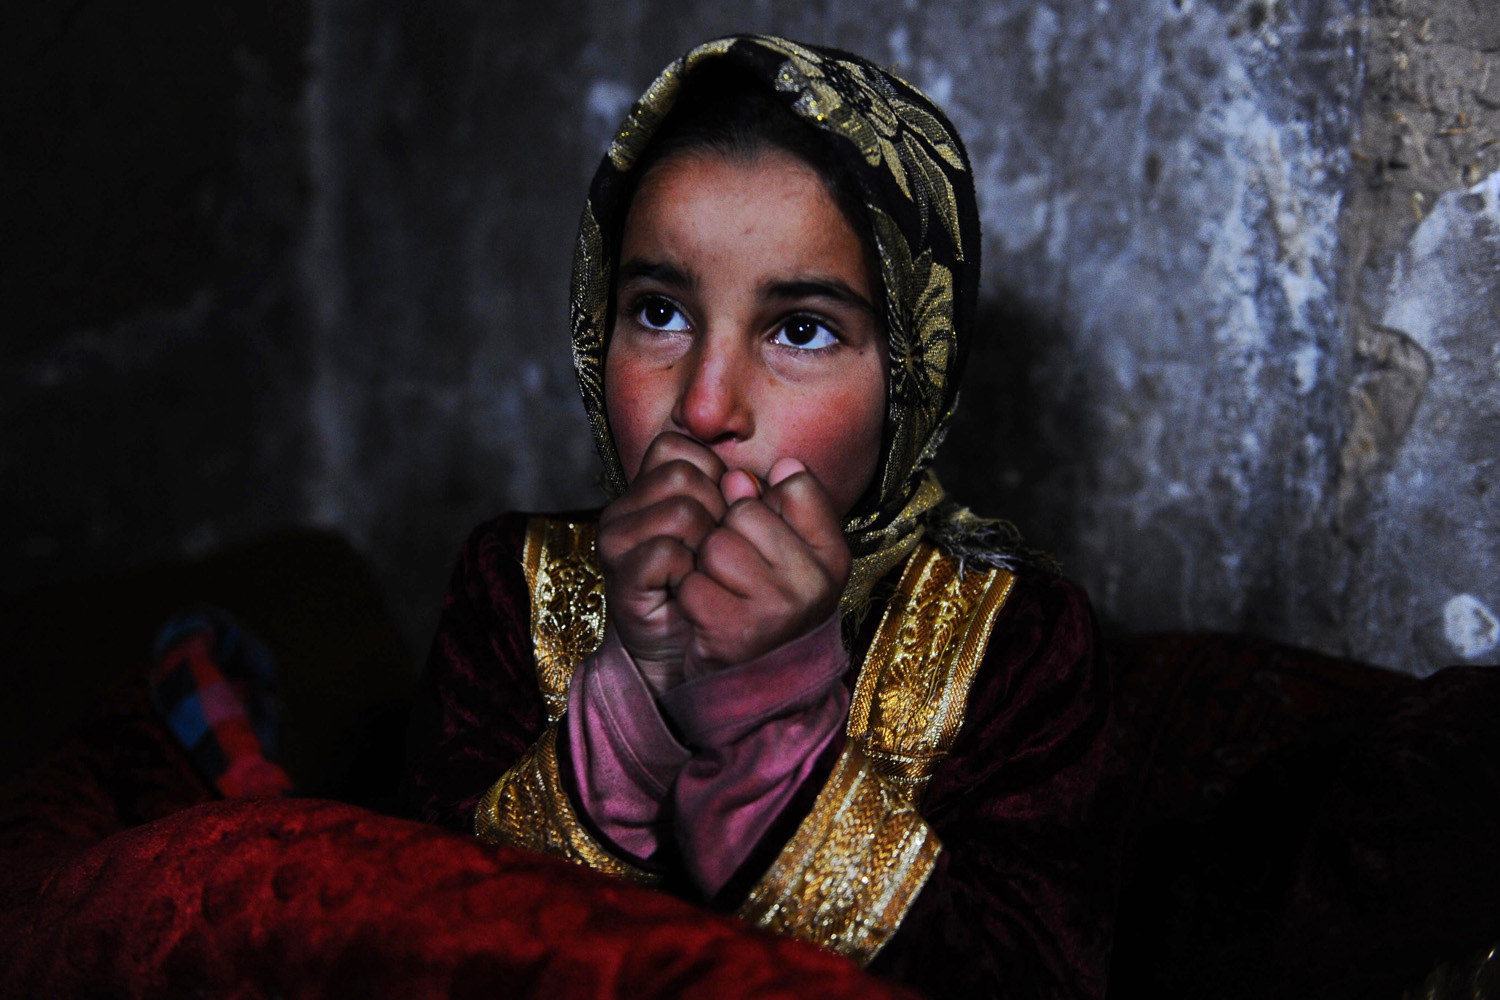 Feb. 7, 2014. An Afghan child warms herself near a traditional  sandali  stove at her family's home in Herat, Afghanistan.